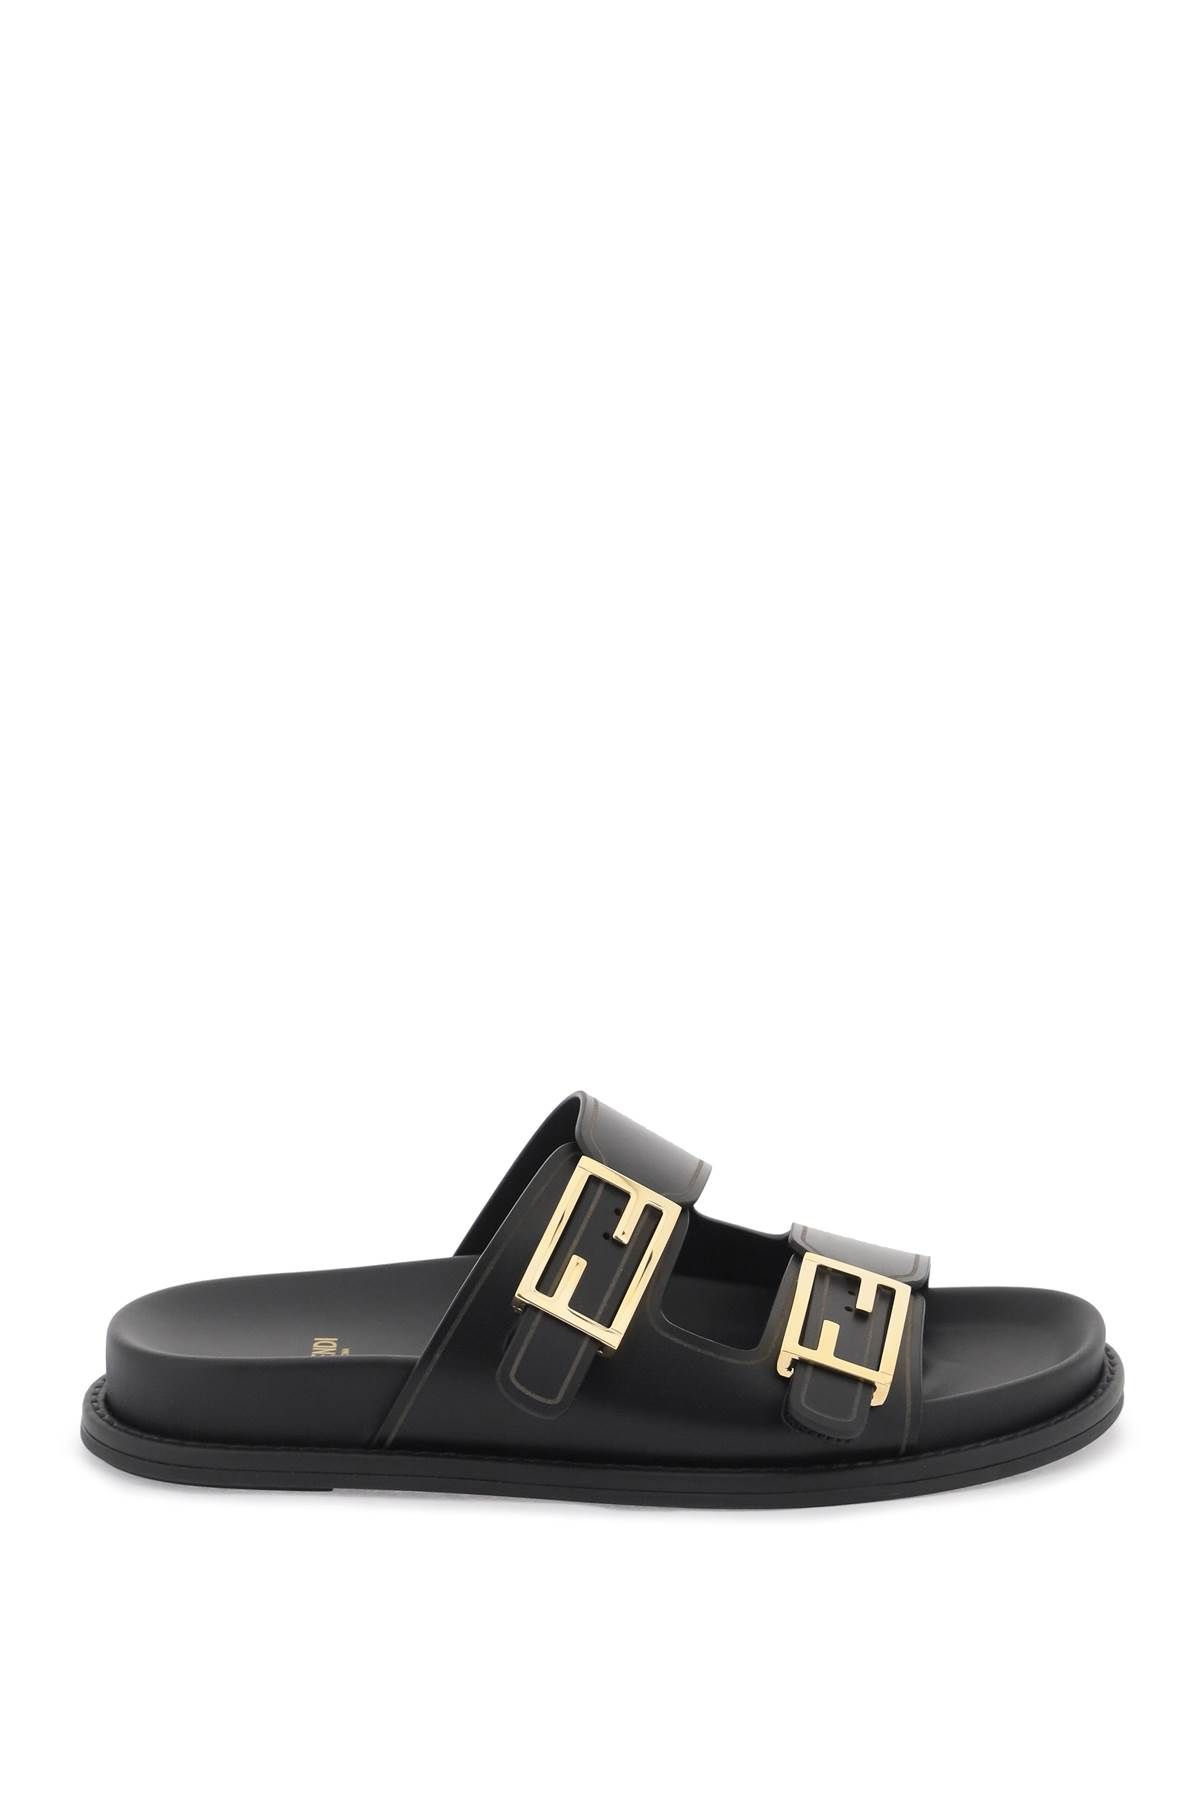 Shop Fendi Leather Slides With A Luxurious In Black